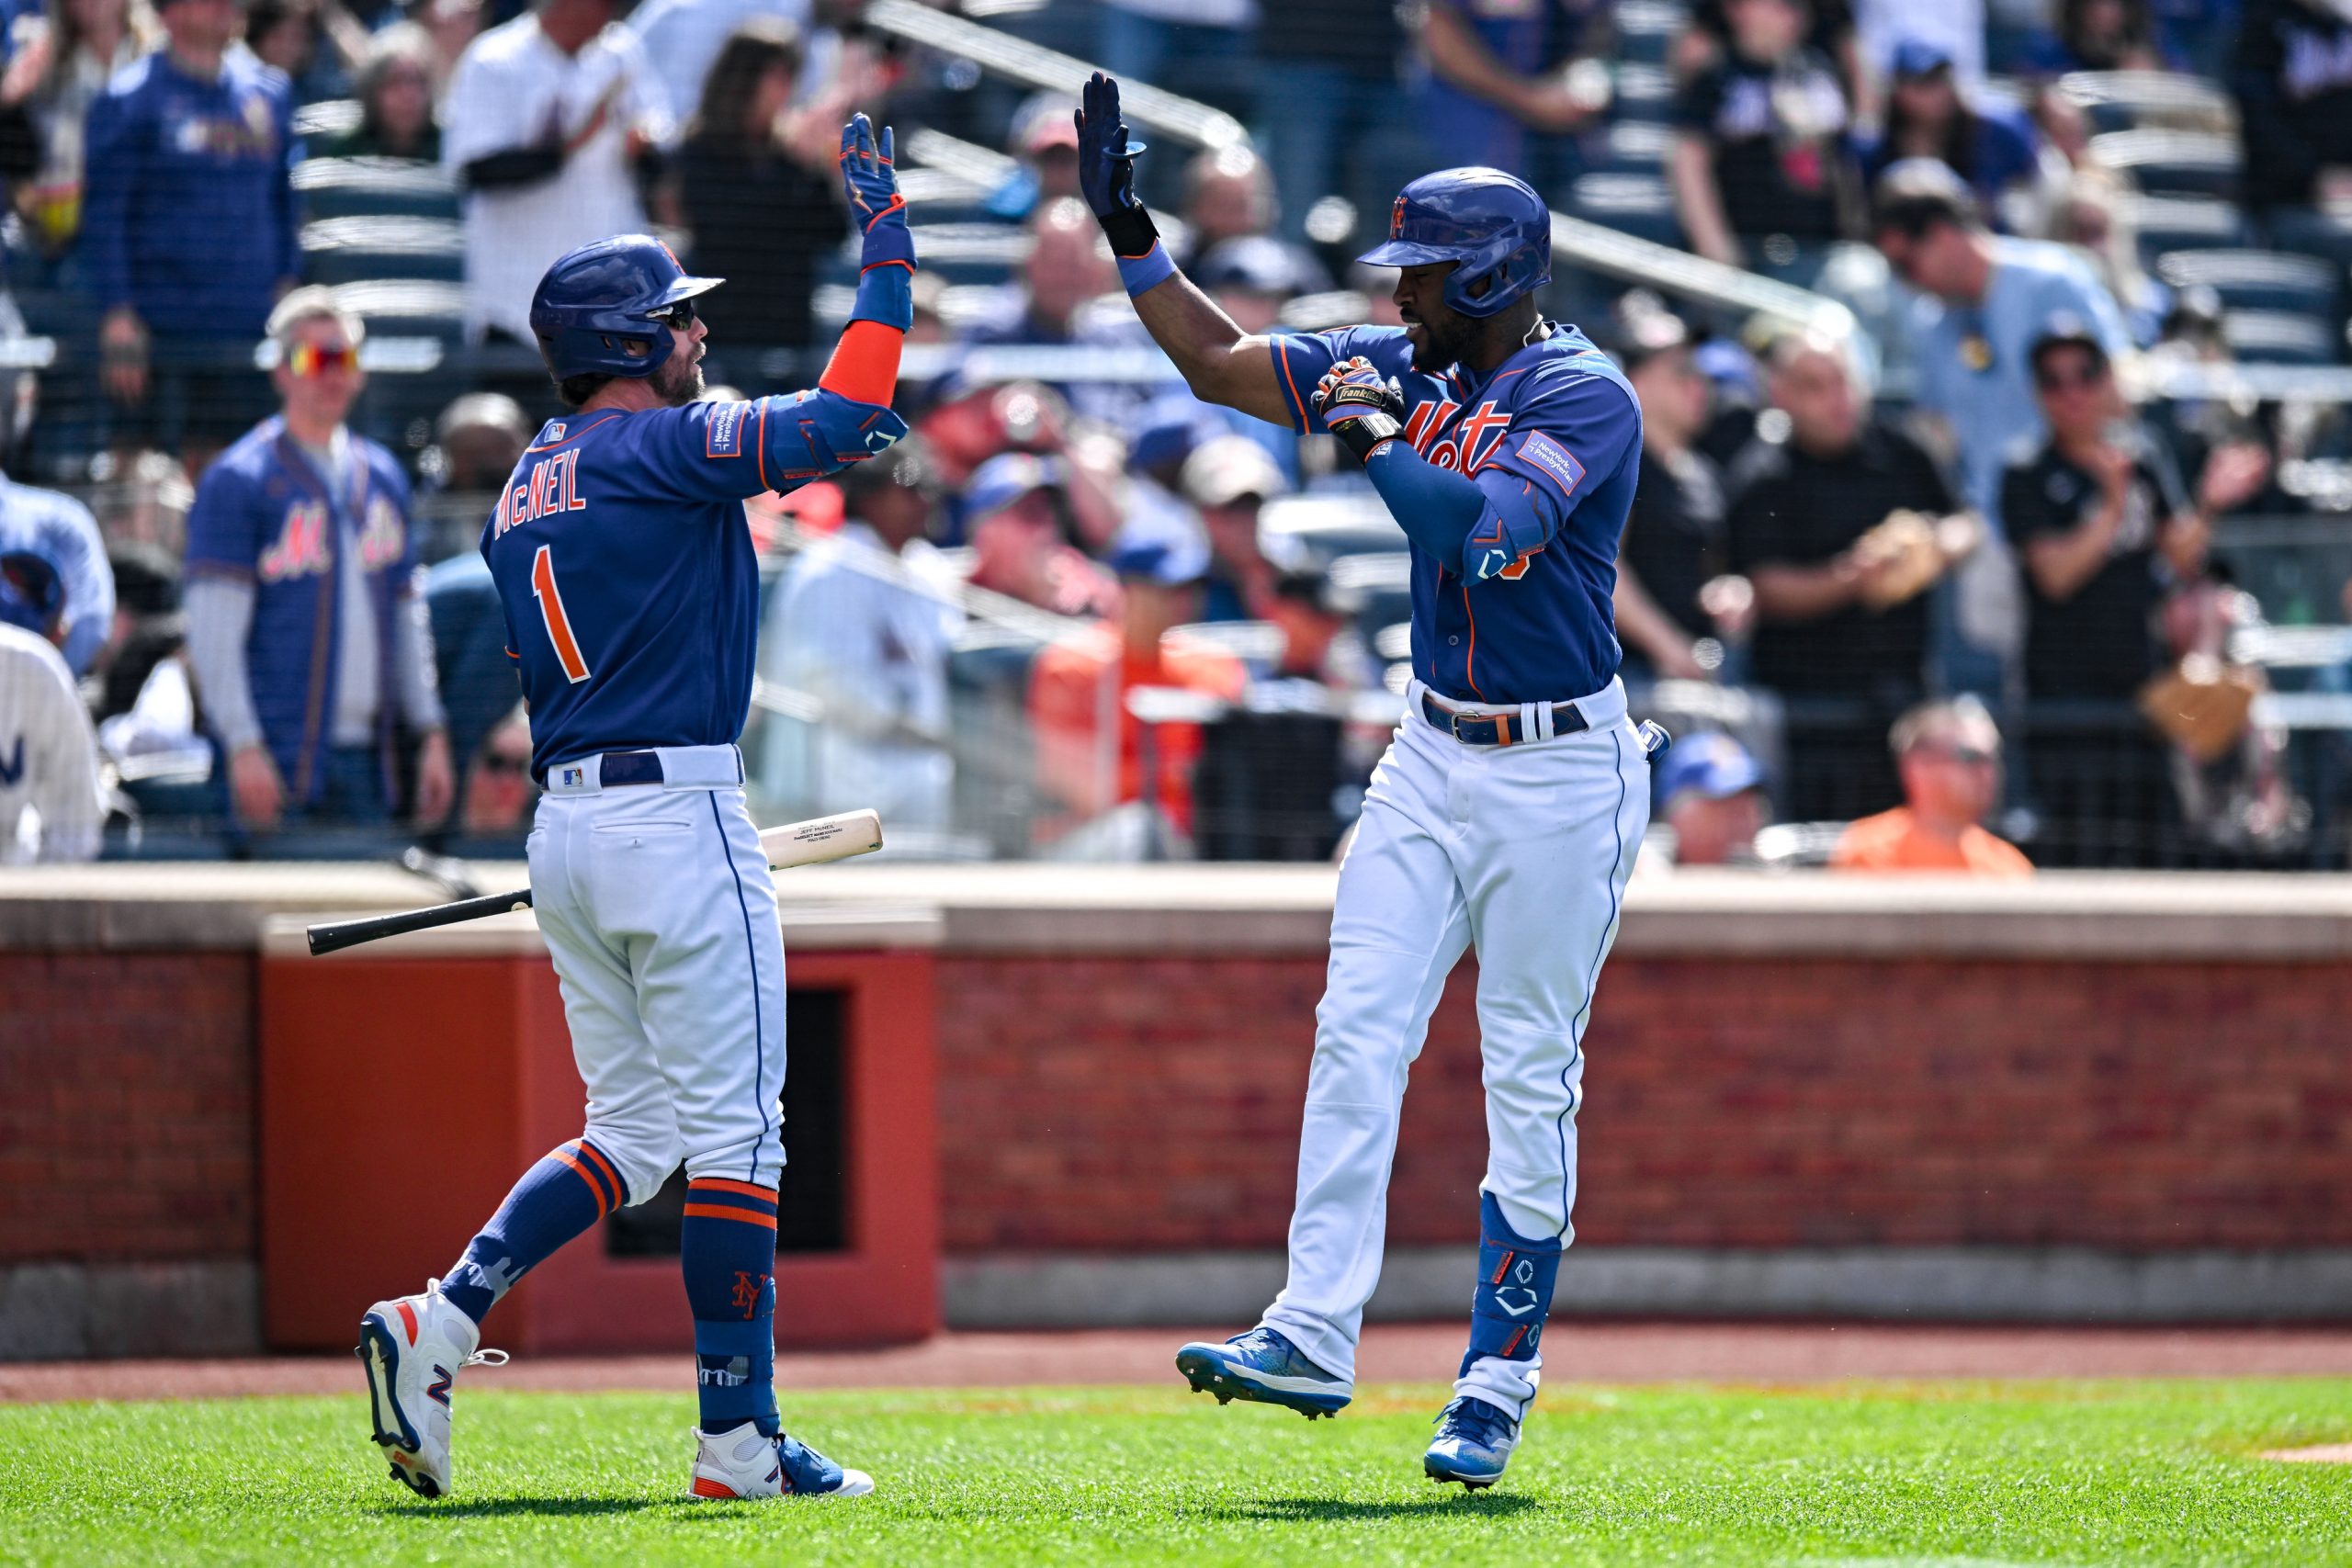 New York Mets Continue to Lose With Starling Marte 